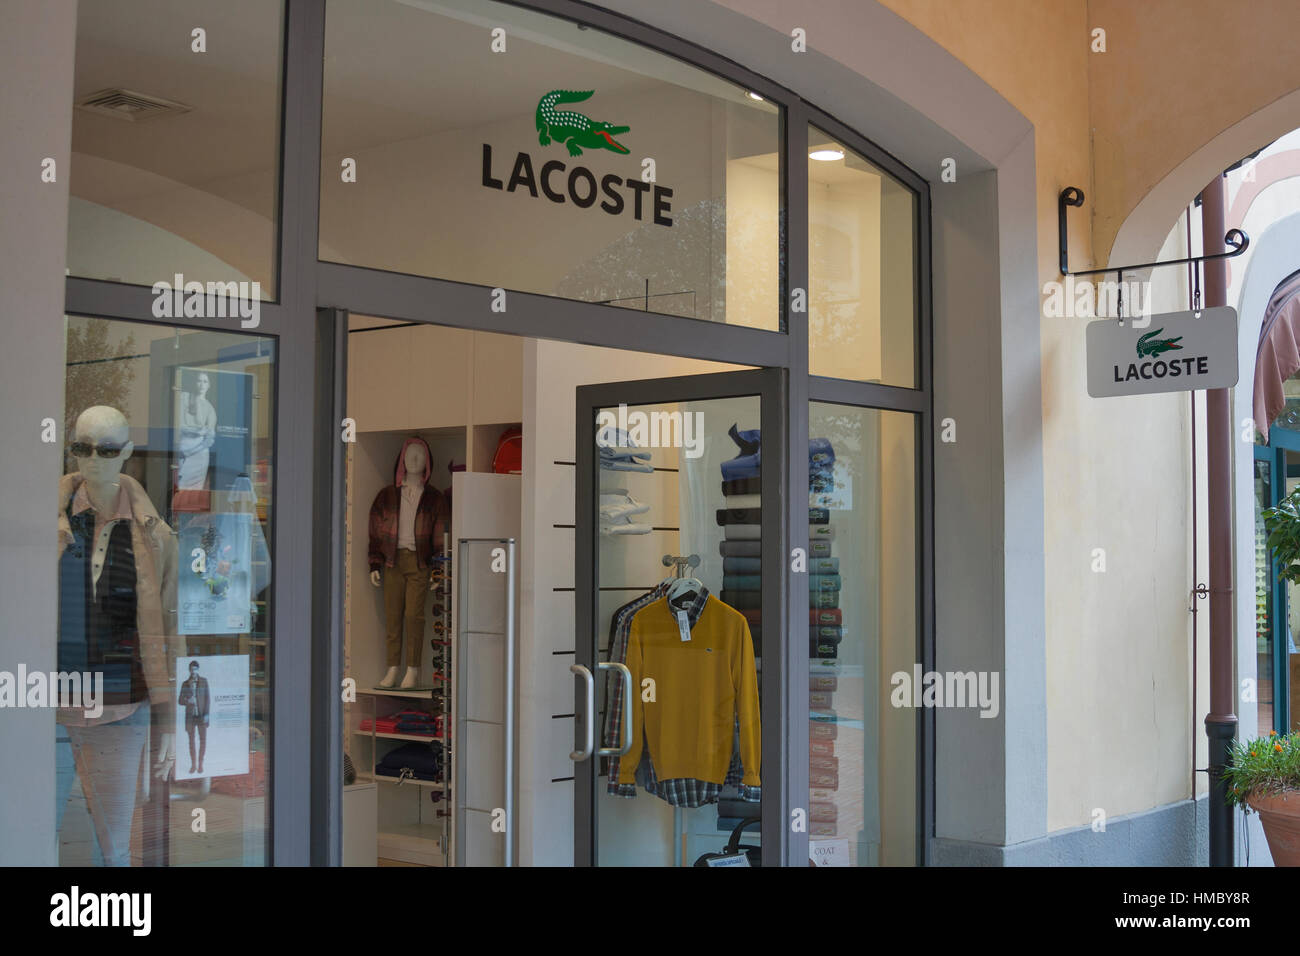 Lacoste Outlet Shop High Resolution 